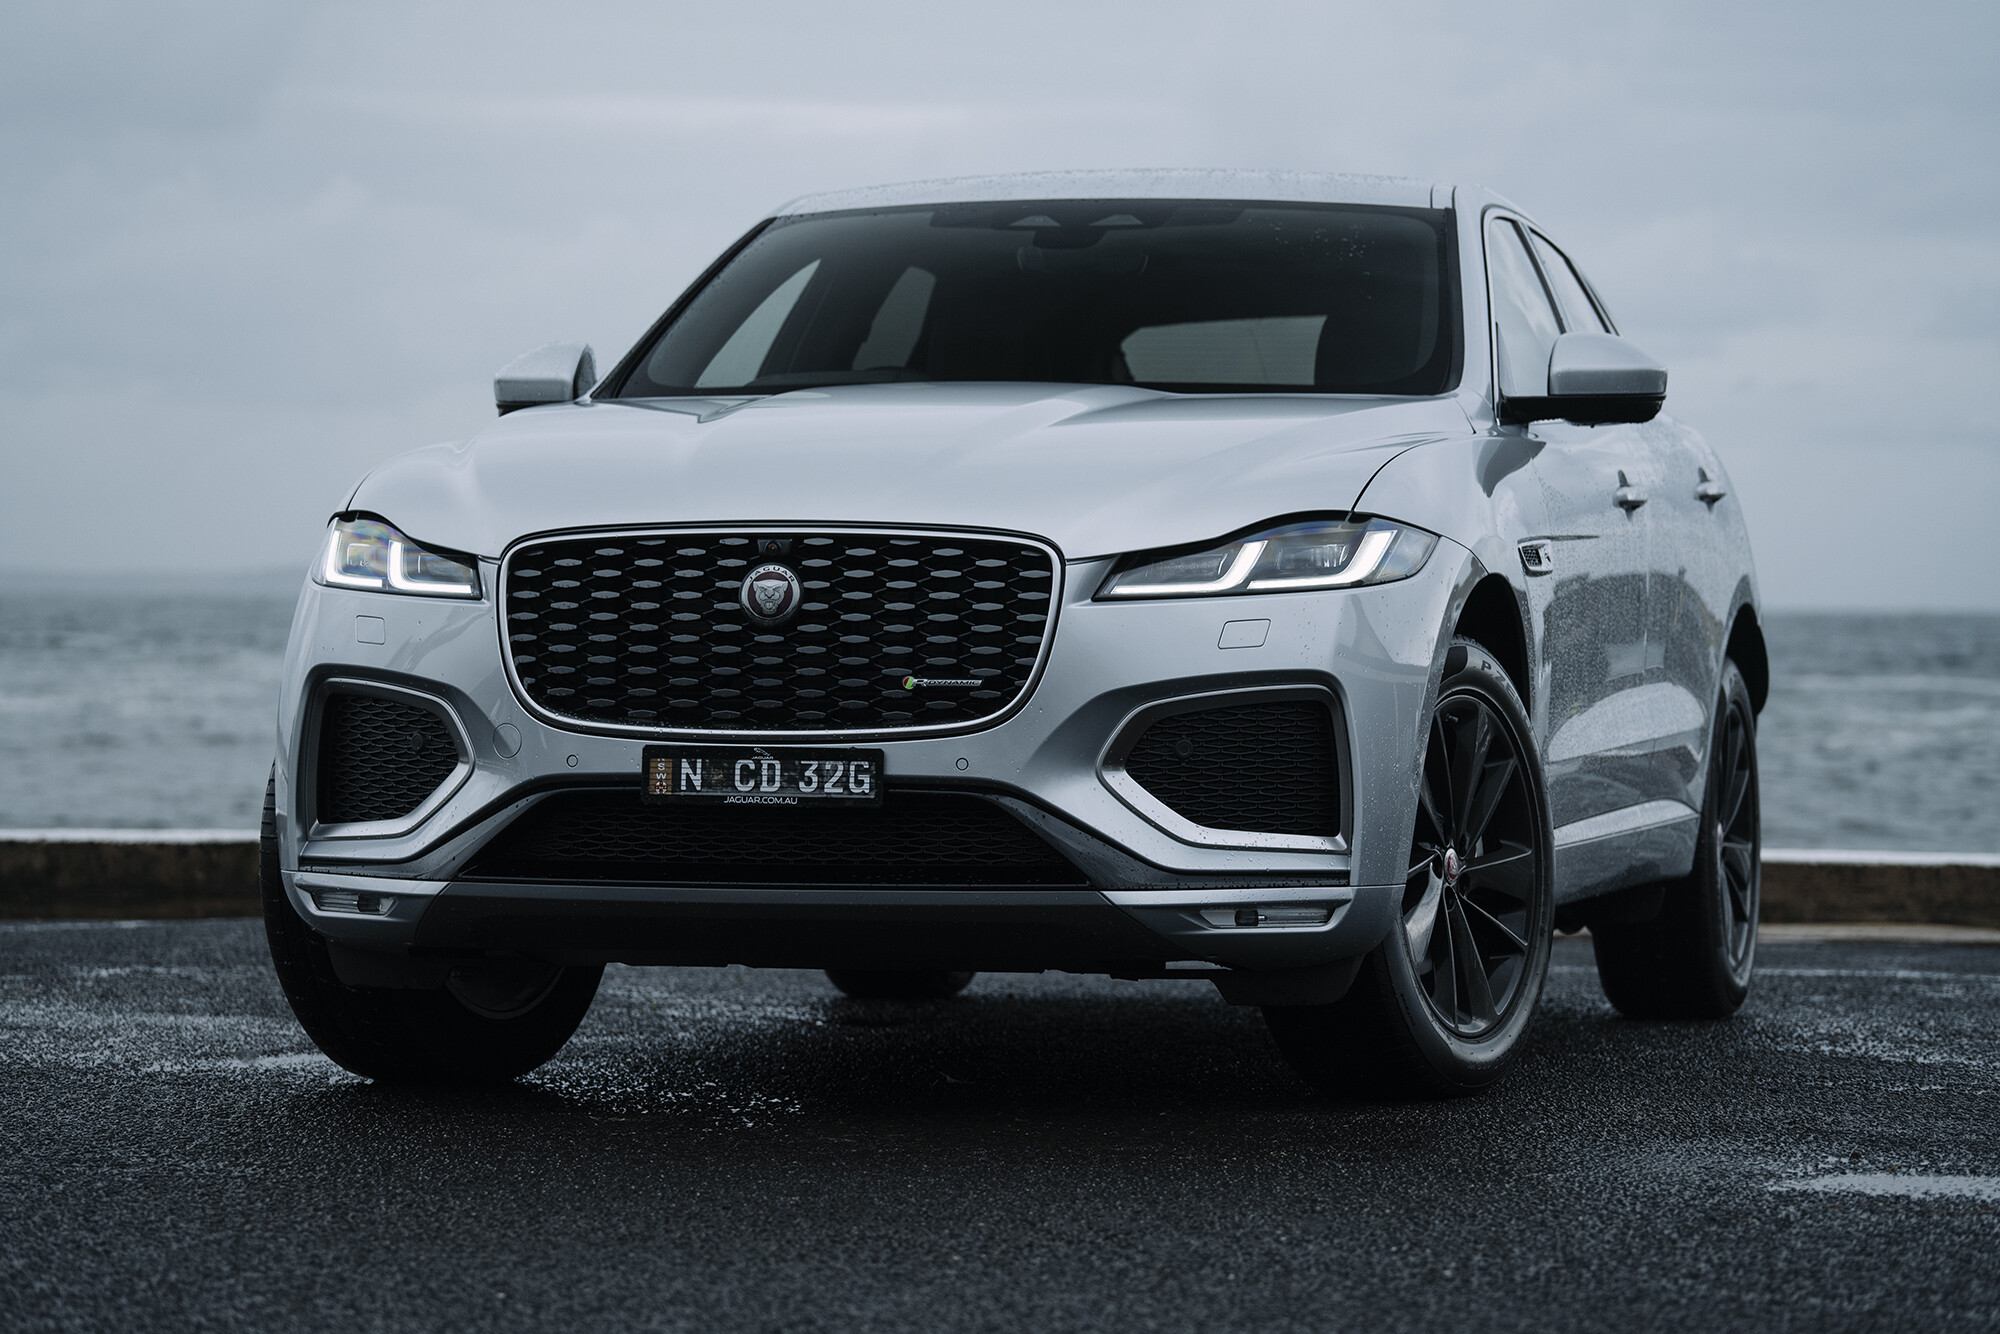 21 Jaguar F Pace Pricing And Features For Australia